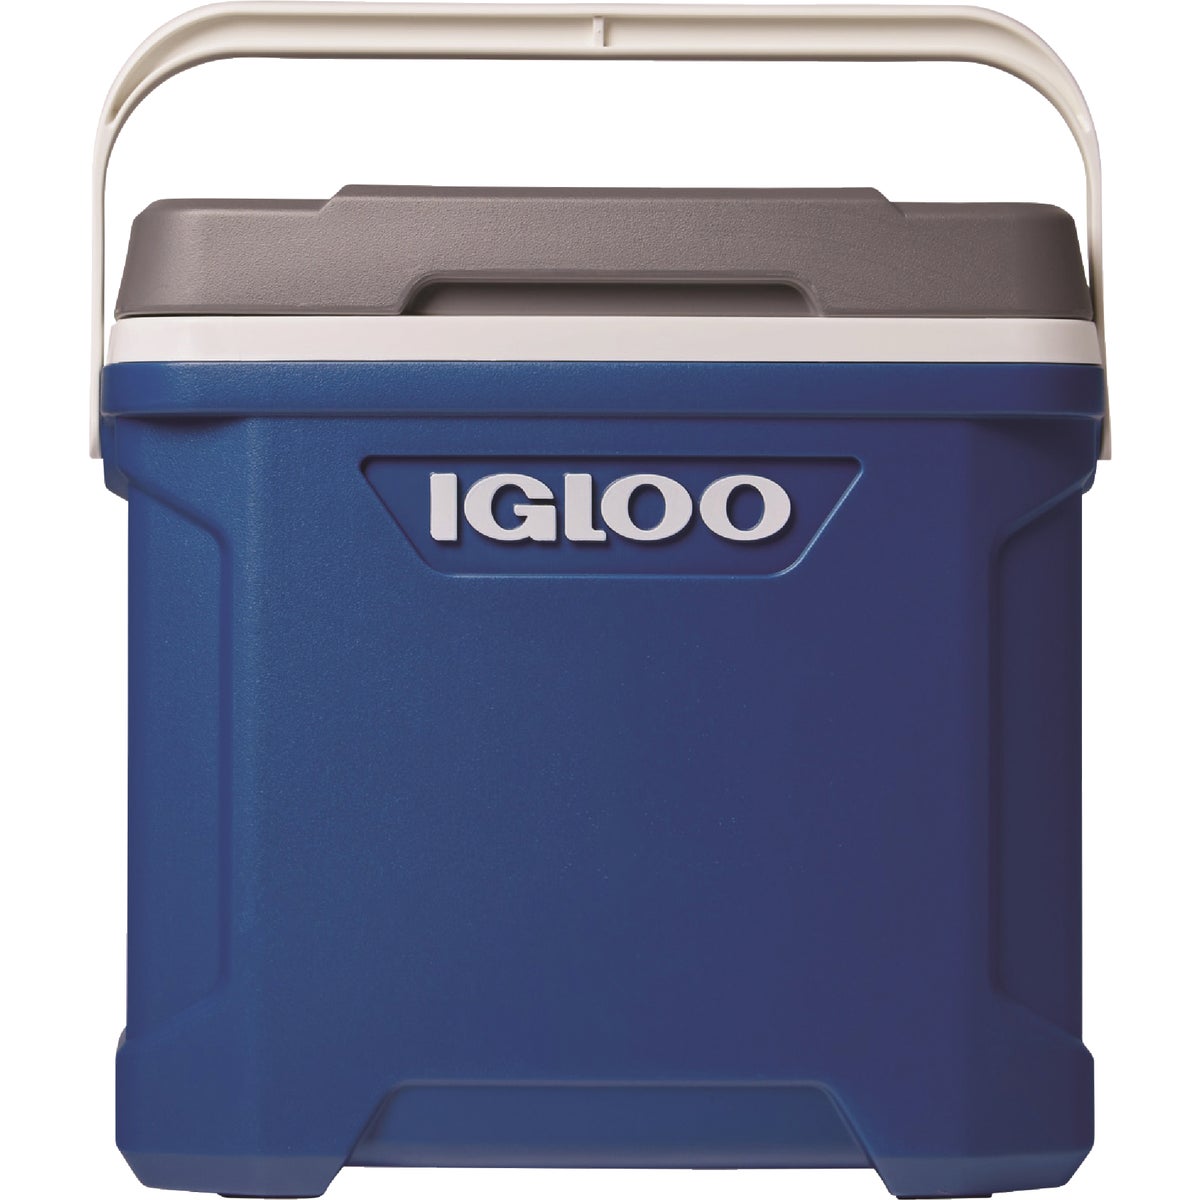 Item 819077, Tall profile cooler ideal for accommodating taller beverages like wine and 